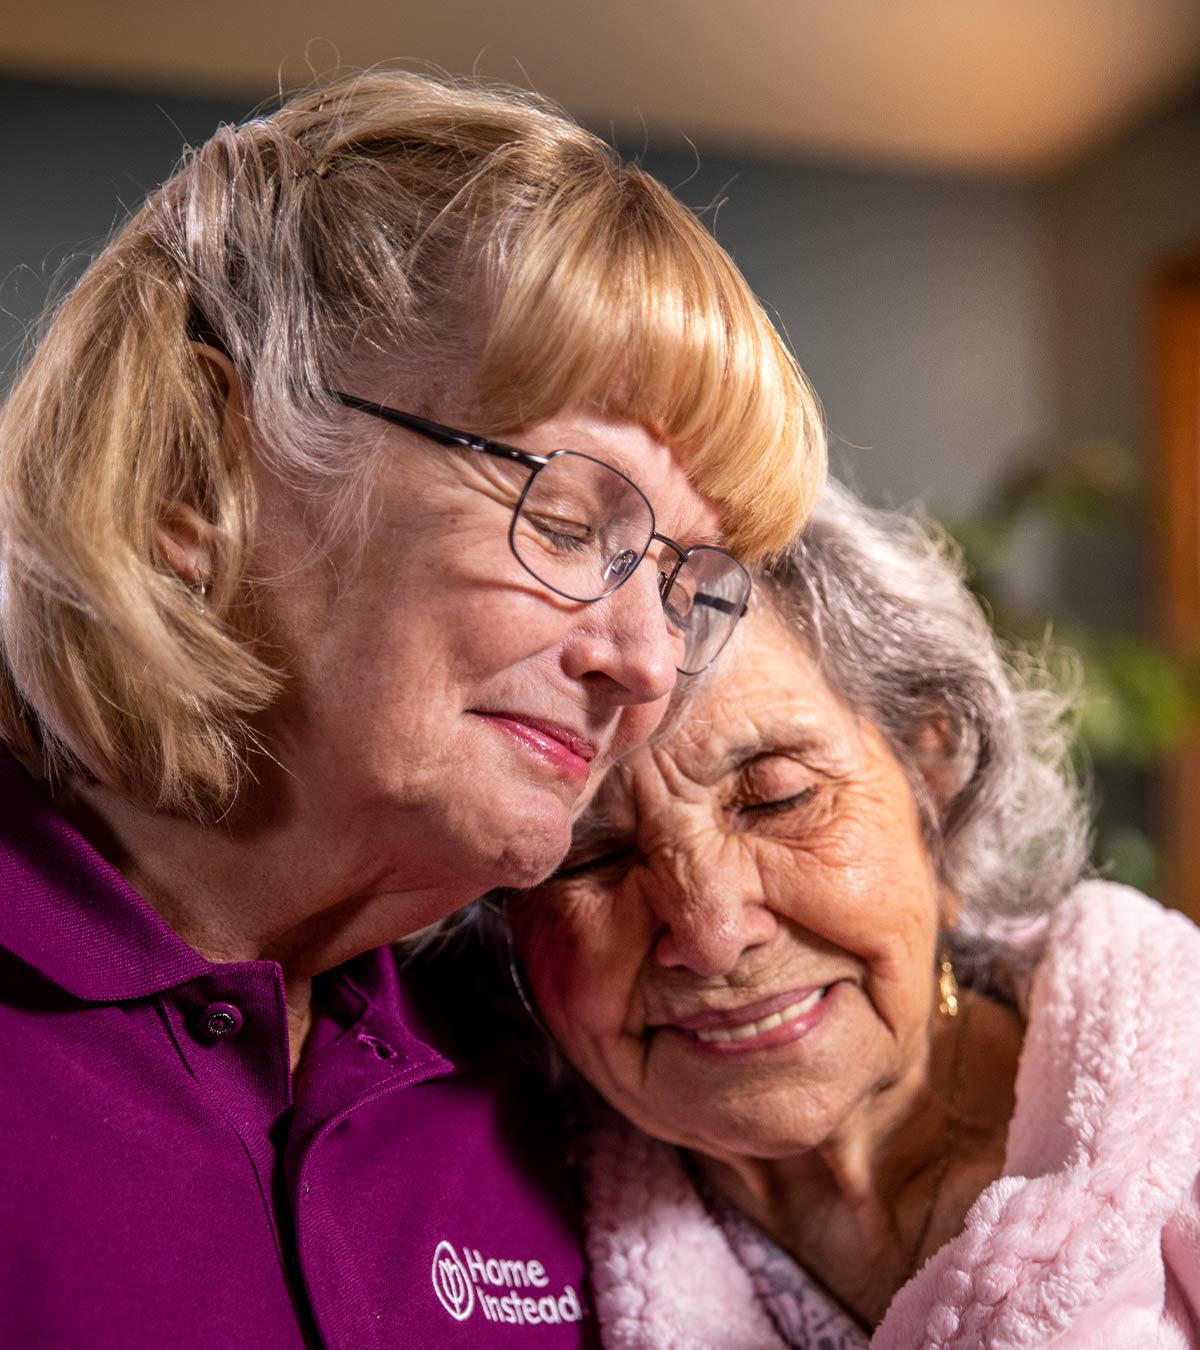 CAREGiver providing in-home senior care services. Home Instead of Charleston, SC provides Elder Care to aging adults. 